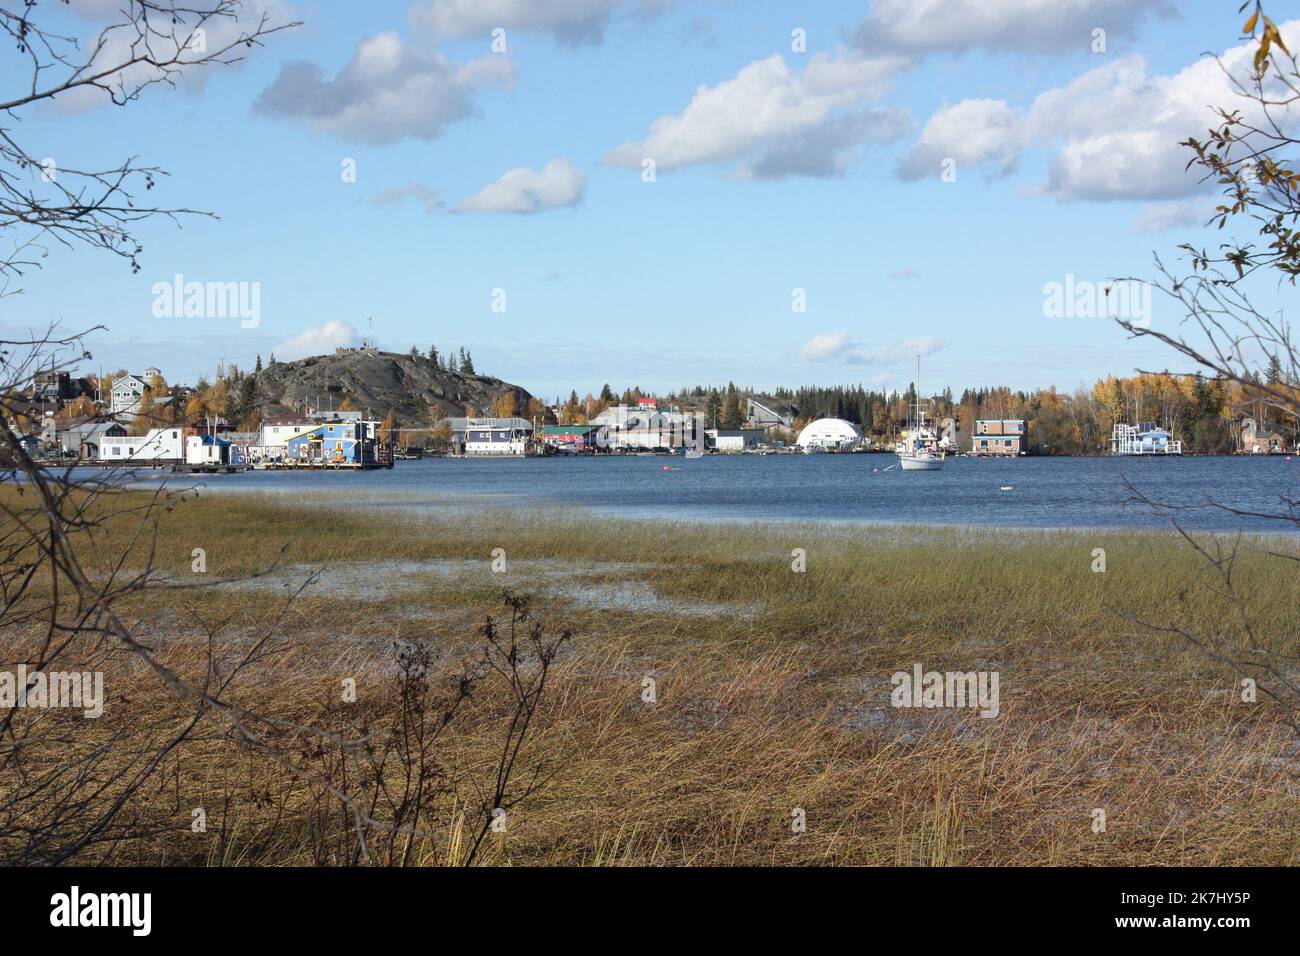 Houseboats on the Great Slave Lake, Yellowknife, Northwest Territories, Canada Stock Photo